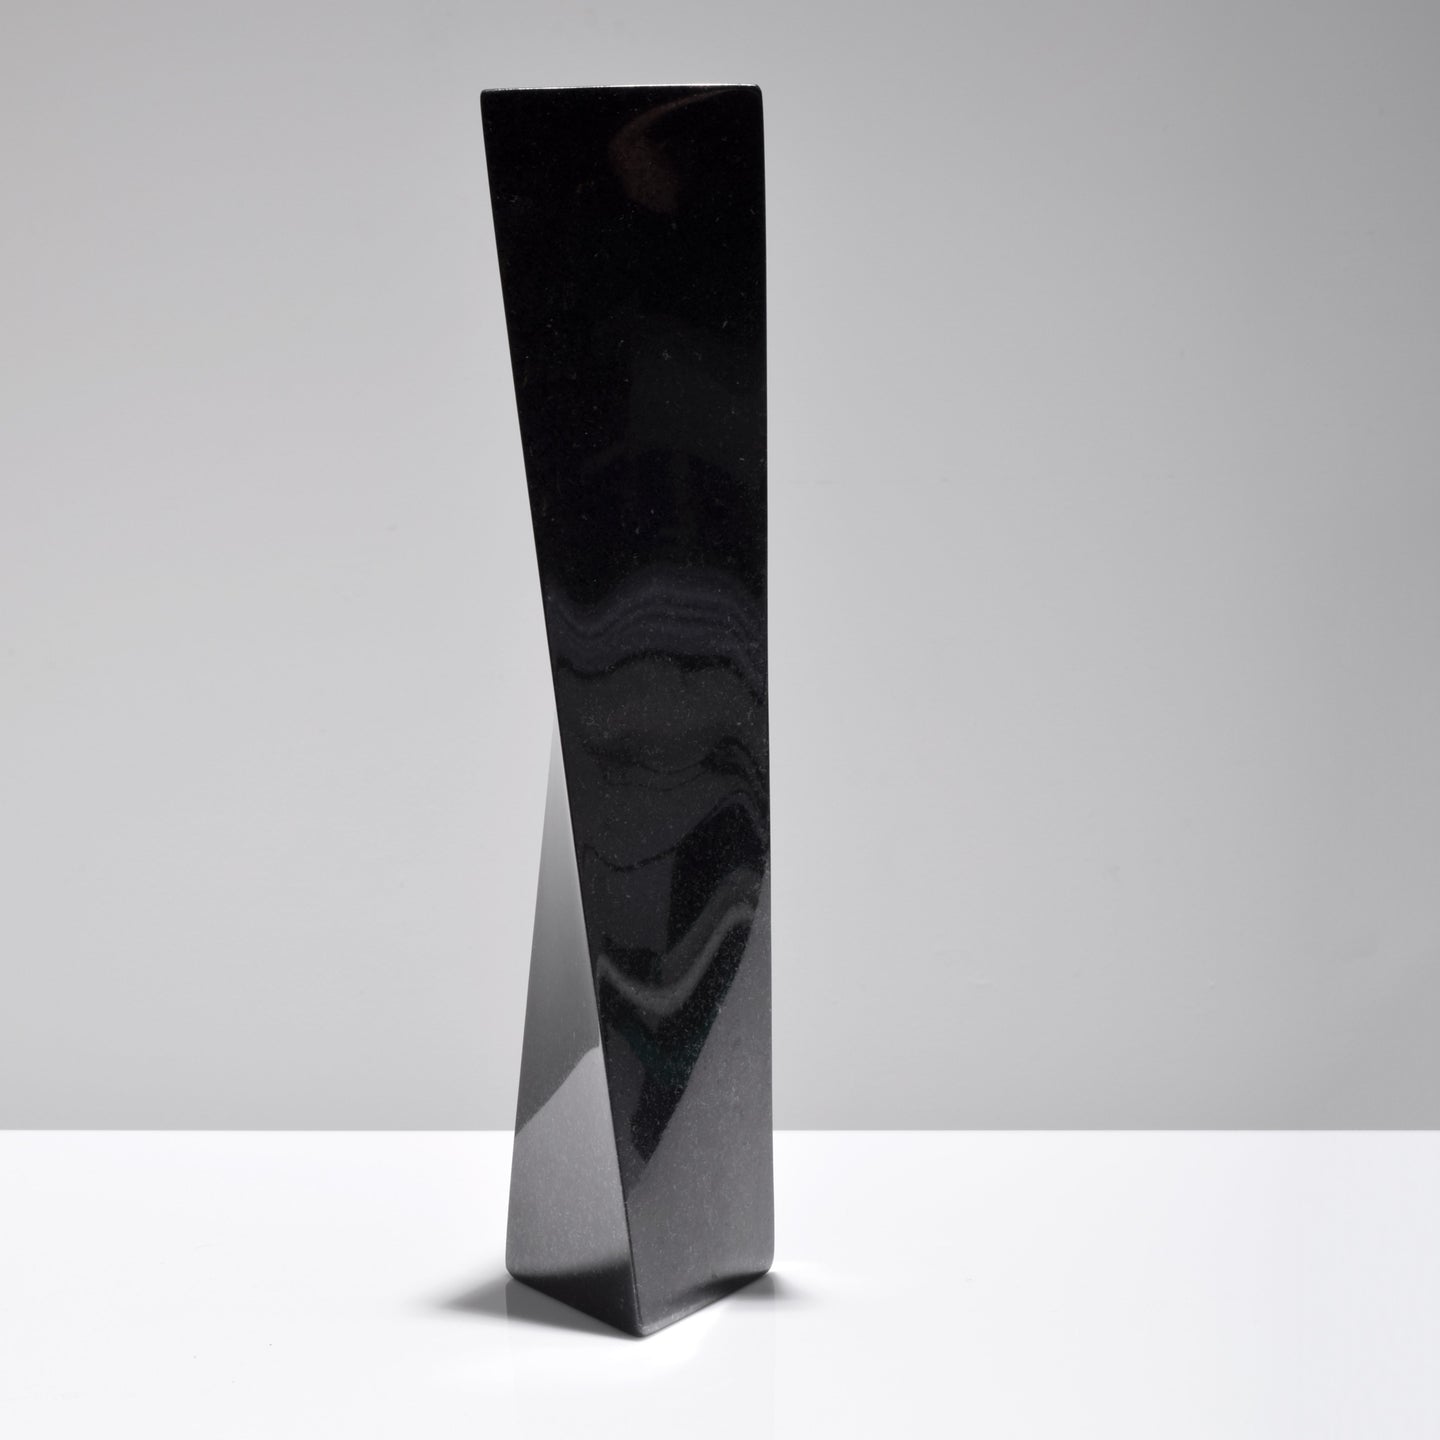 Pal Svensson (b. 1950) Pillar Statue, 2006 Swedish; granite 19 x 4 x 4 inches Edition: 2 of 8 Pal Svensson is Sweden's most famous sculptor and known for his large-scale art installations throughout Sweden. This contemporary black sculpture is made of granite. Available at Manolis Projects Gallery